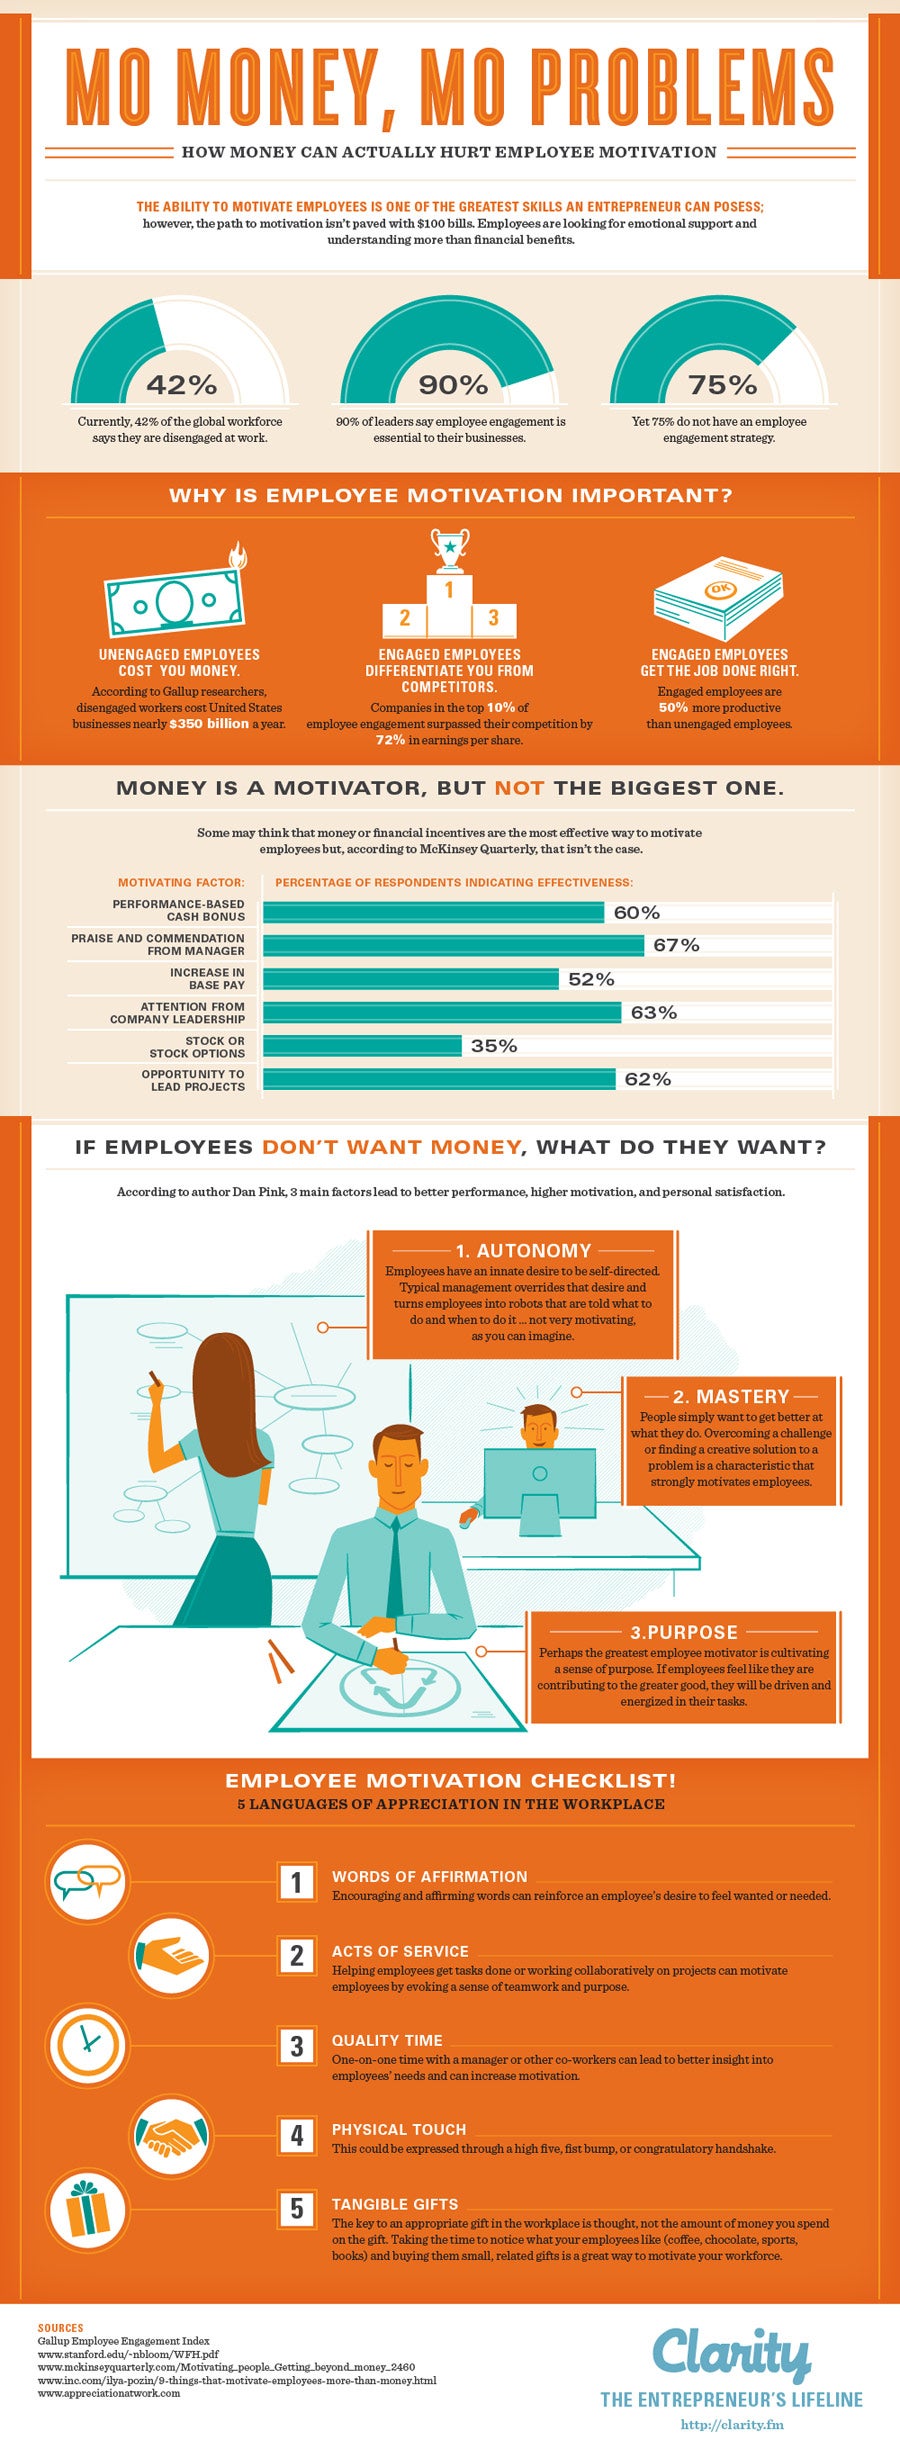 What Really Motivates Employees?